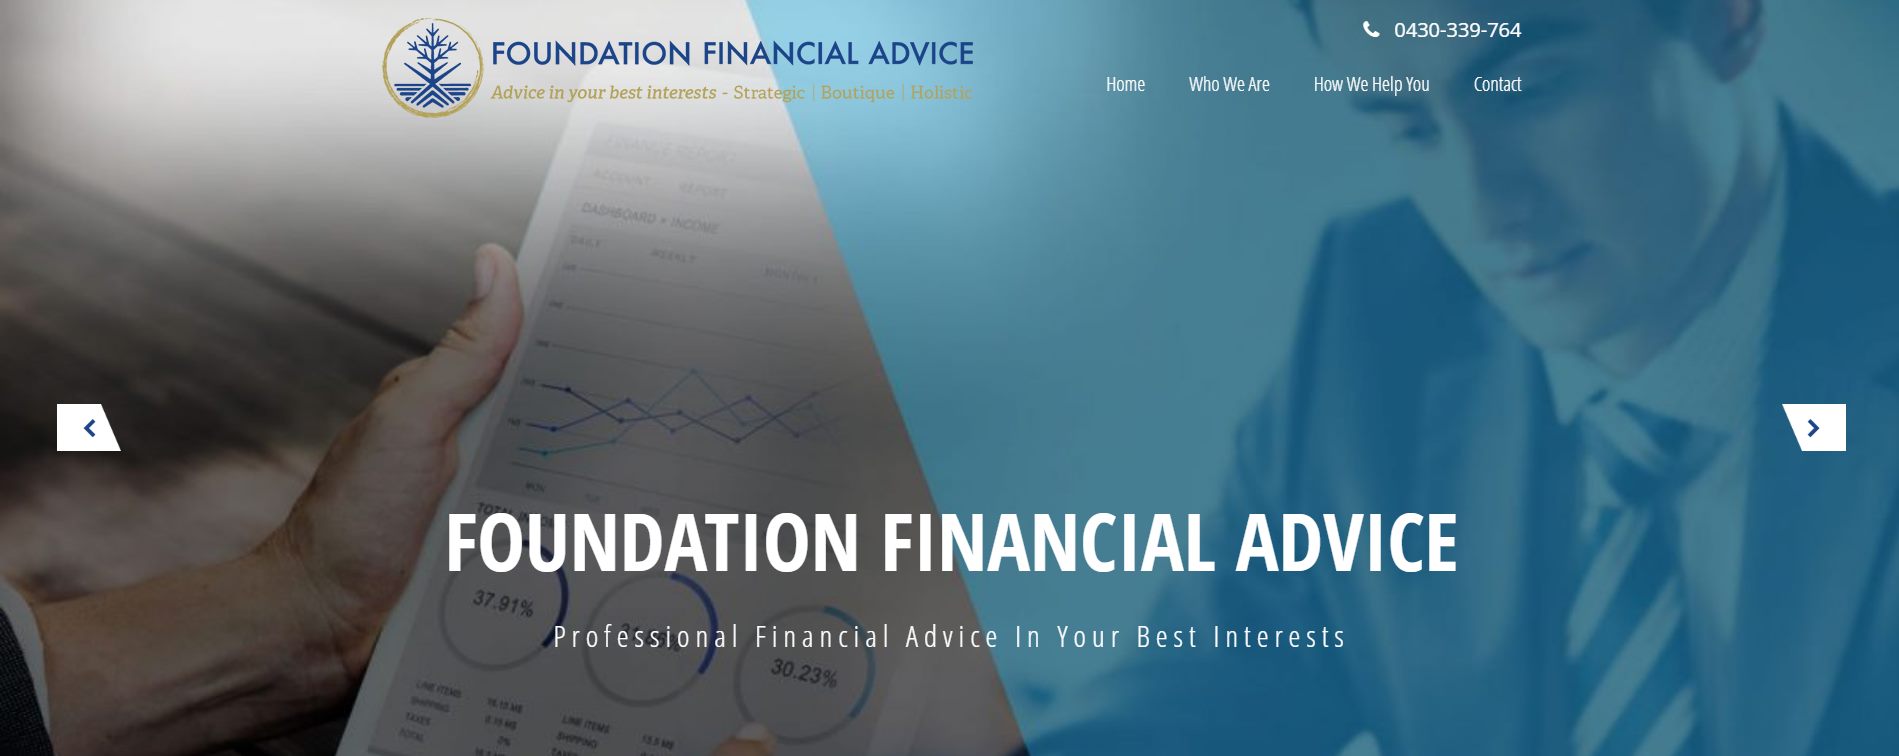 foundation financial advice financial planners & advisors melbourne